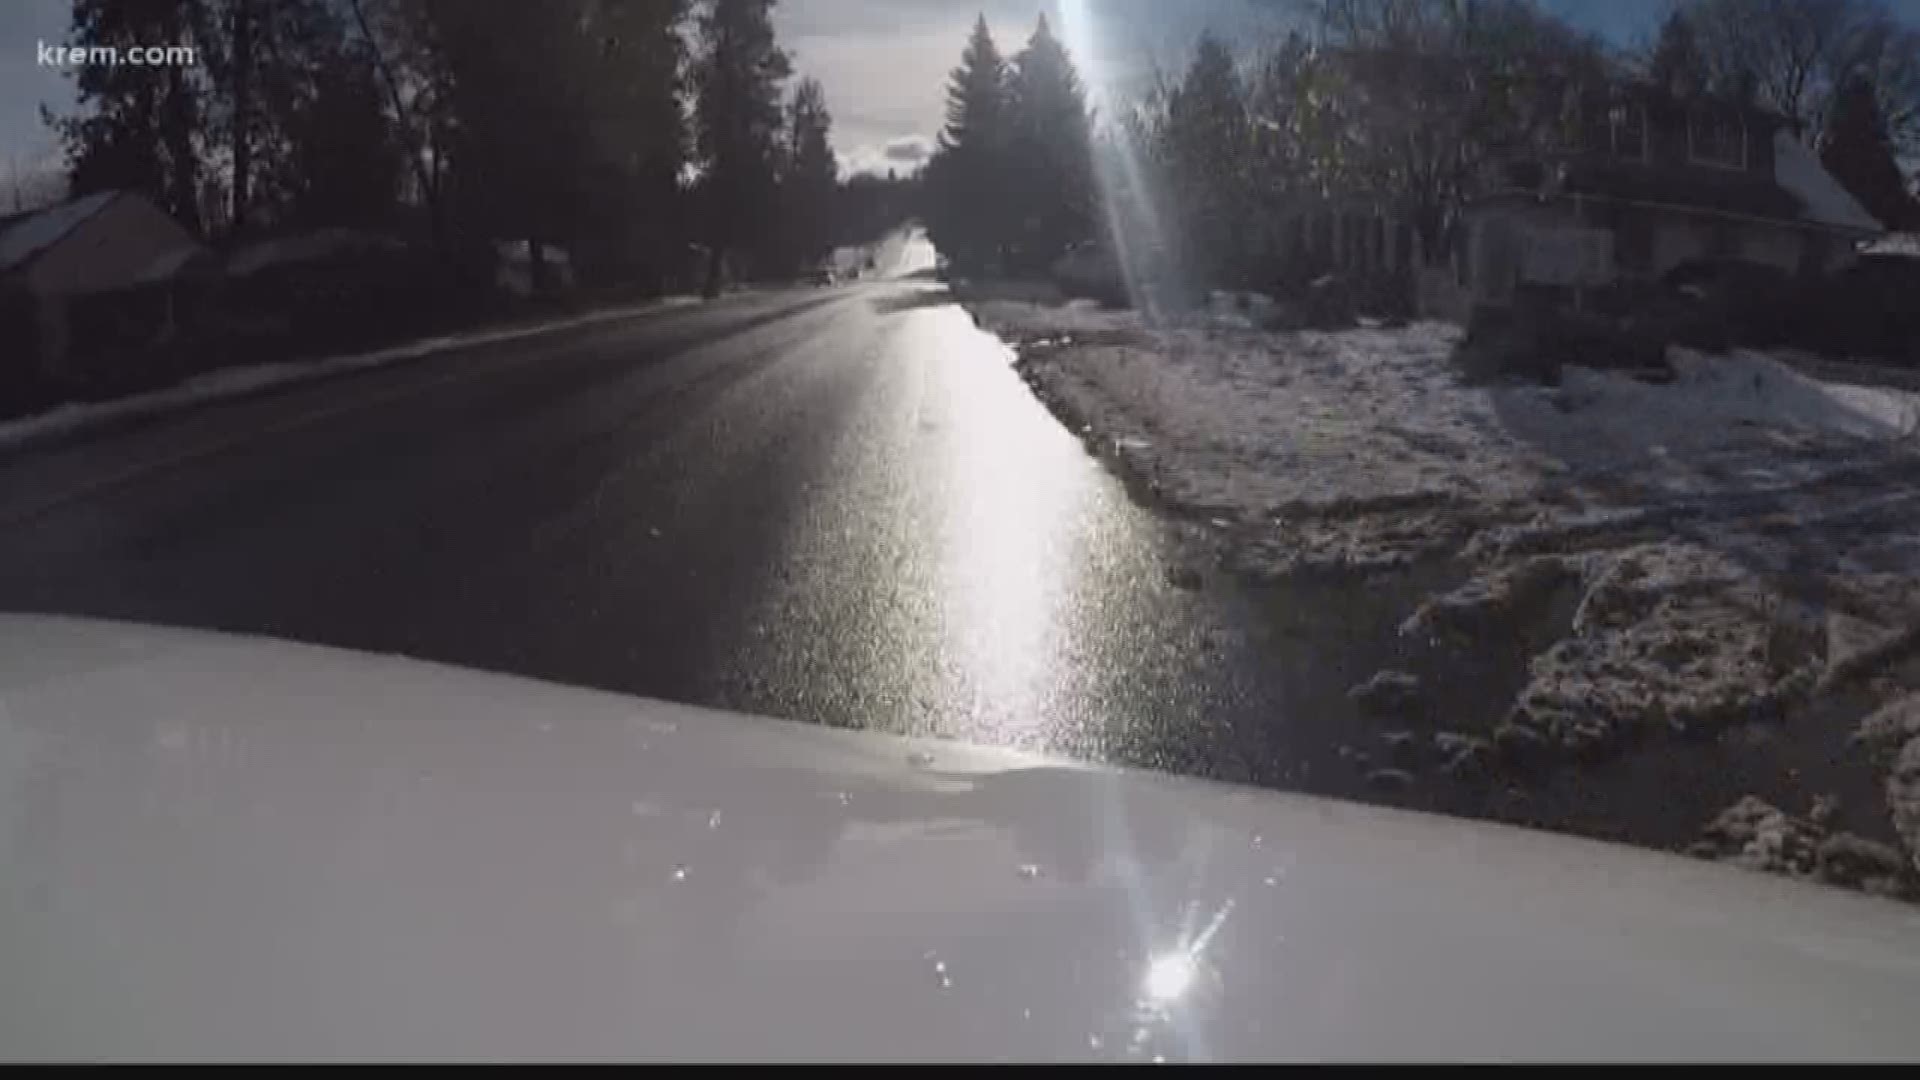 Maybe you've noticed Spokane roads aren't quite as bad as they've been in past years. Part of this is due to the mild winter we're having and a process the city has in place.